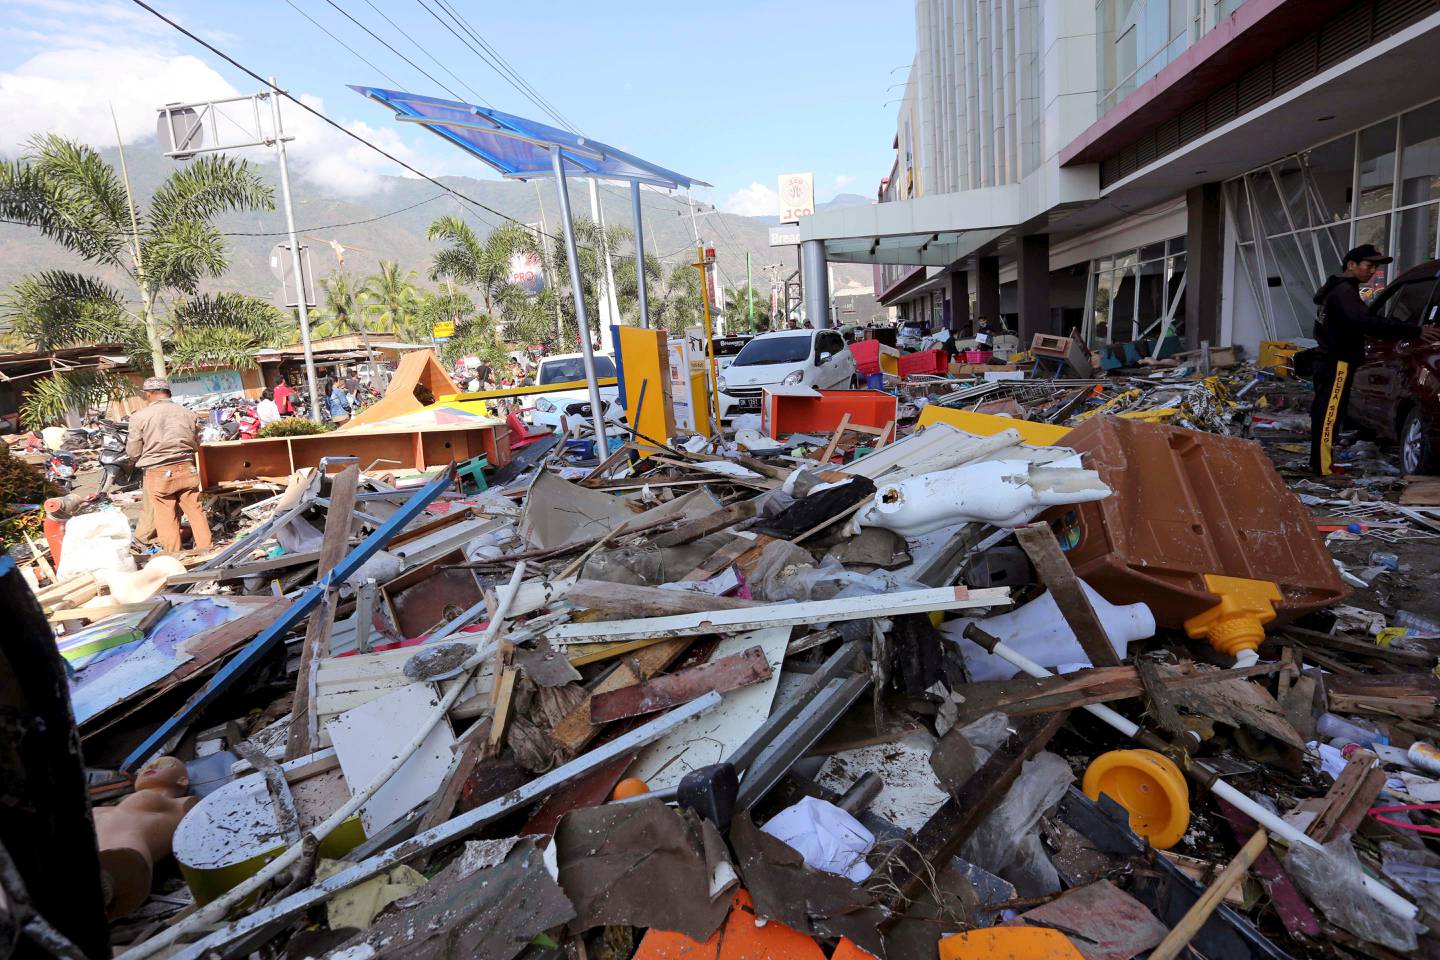 A pile of debris is seen at a shopping mall damaged following earthquakes and tsunami in Palu, Central Sulawesi, Indonesia, Sunday, Sept. 30, 2018. A tsunami swept away buildings and killed hundreds on the Indonesian island of Sulawesi.(AP Photo/Tatan Syuflana)